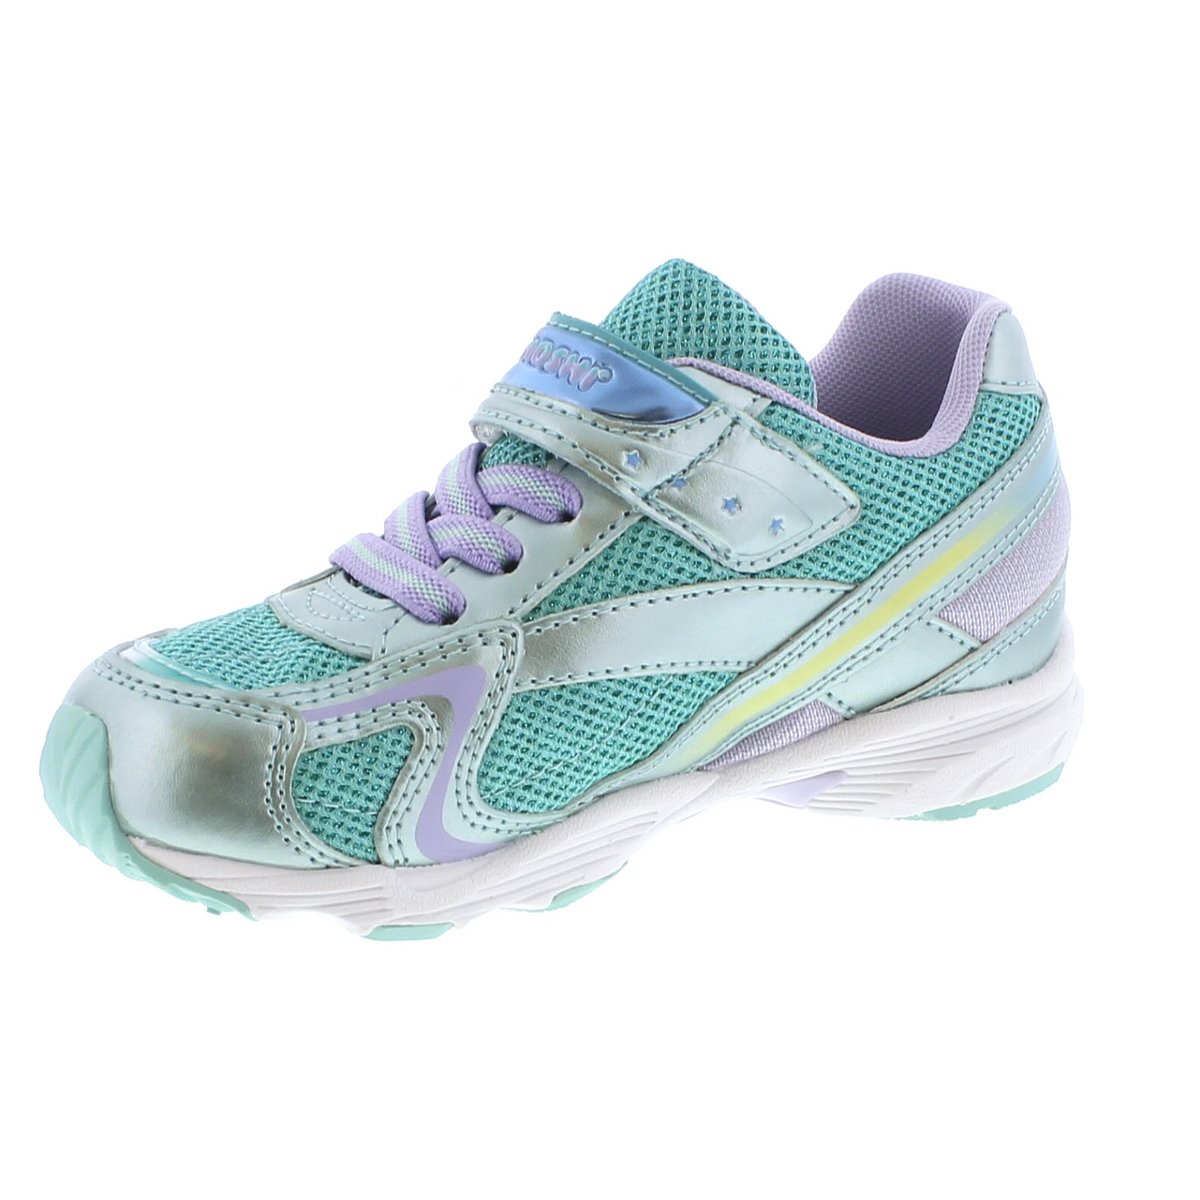 Child Tsukihoshi Glitz Sneaker in Mint/Lavender from the front view